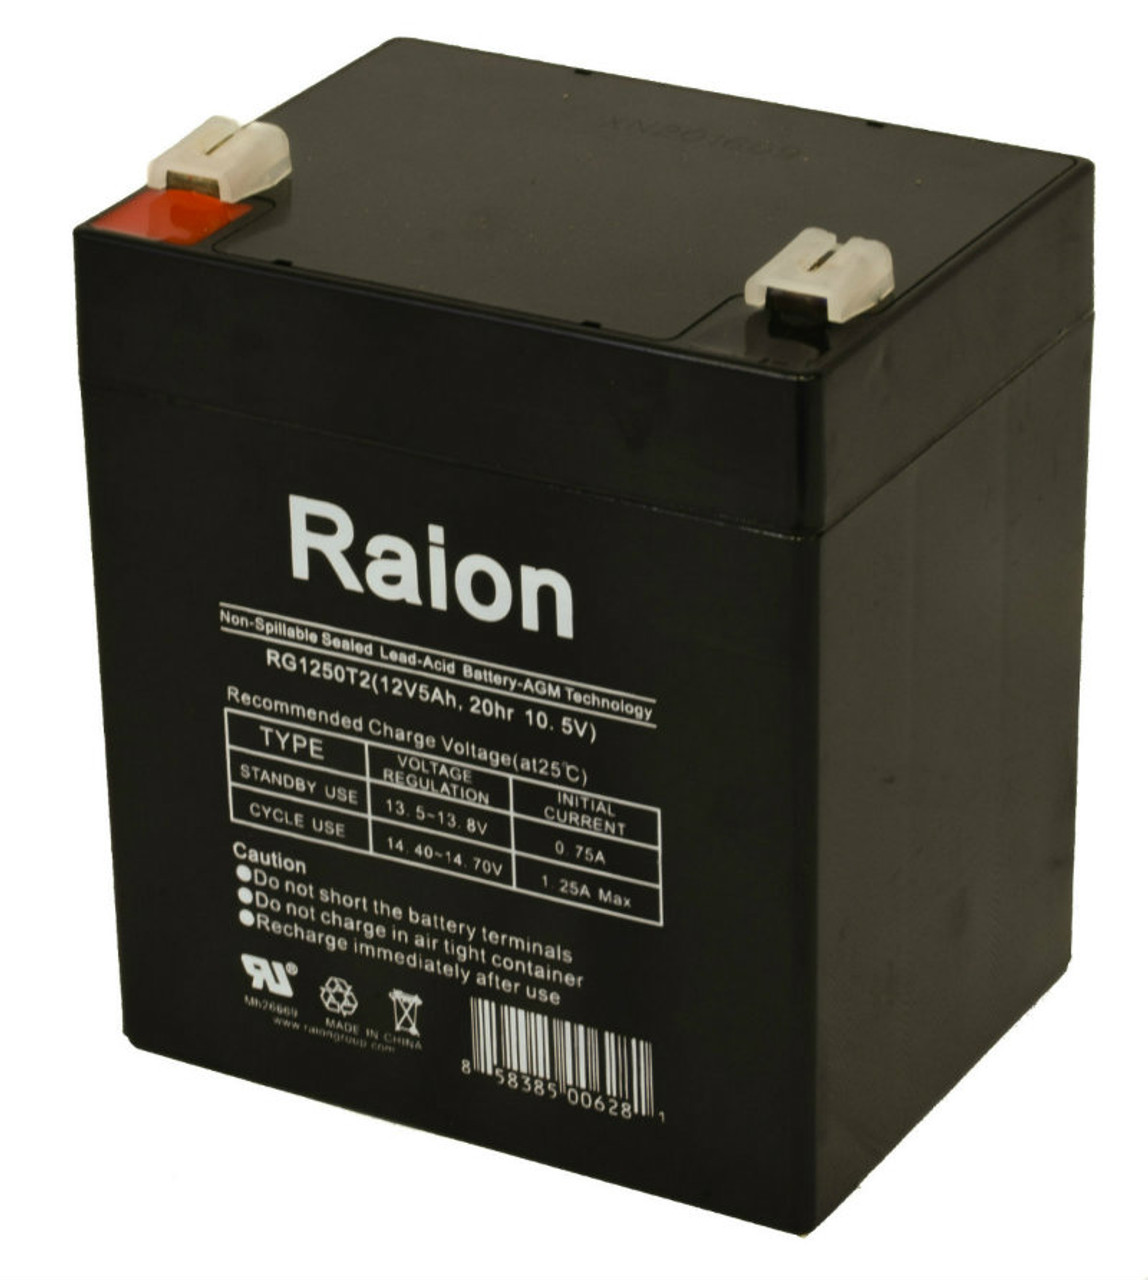 Raion Power 12V 5Ah Replacement Fire Alarm Control Panel Battery for Digital Security Power832